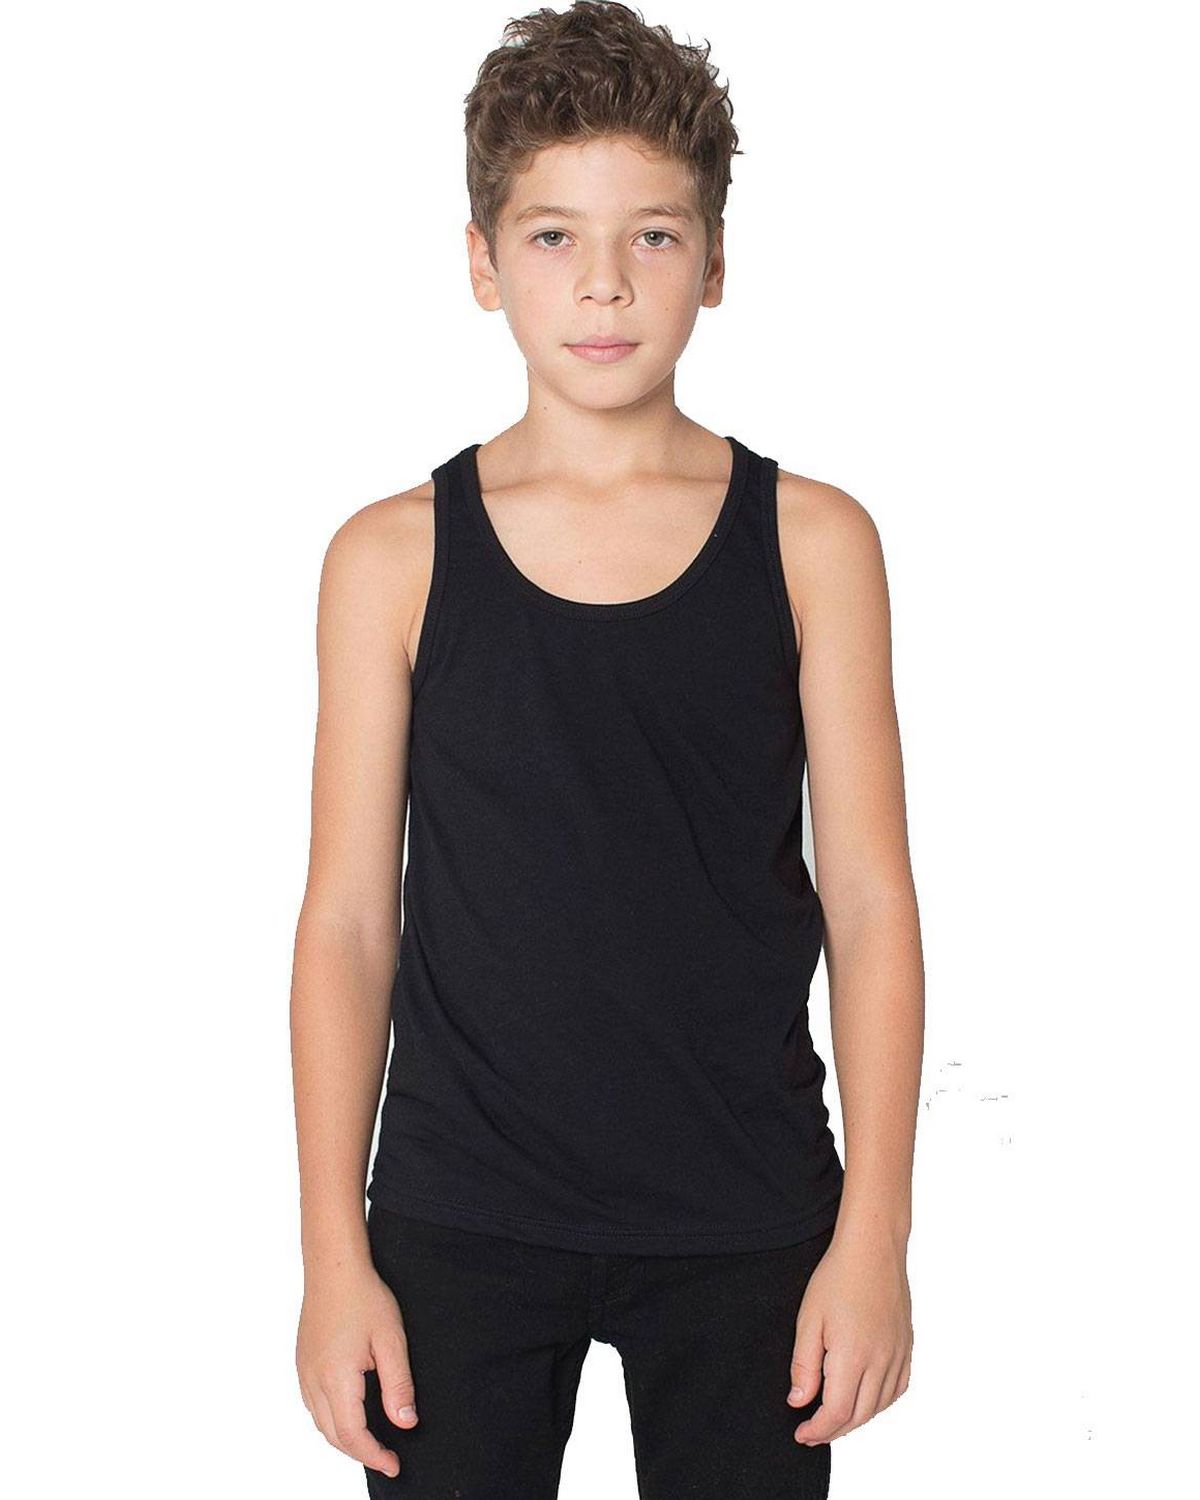 American Apparel Youth Size Chart